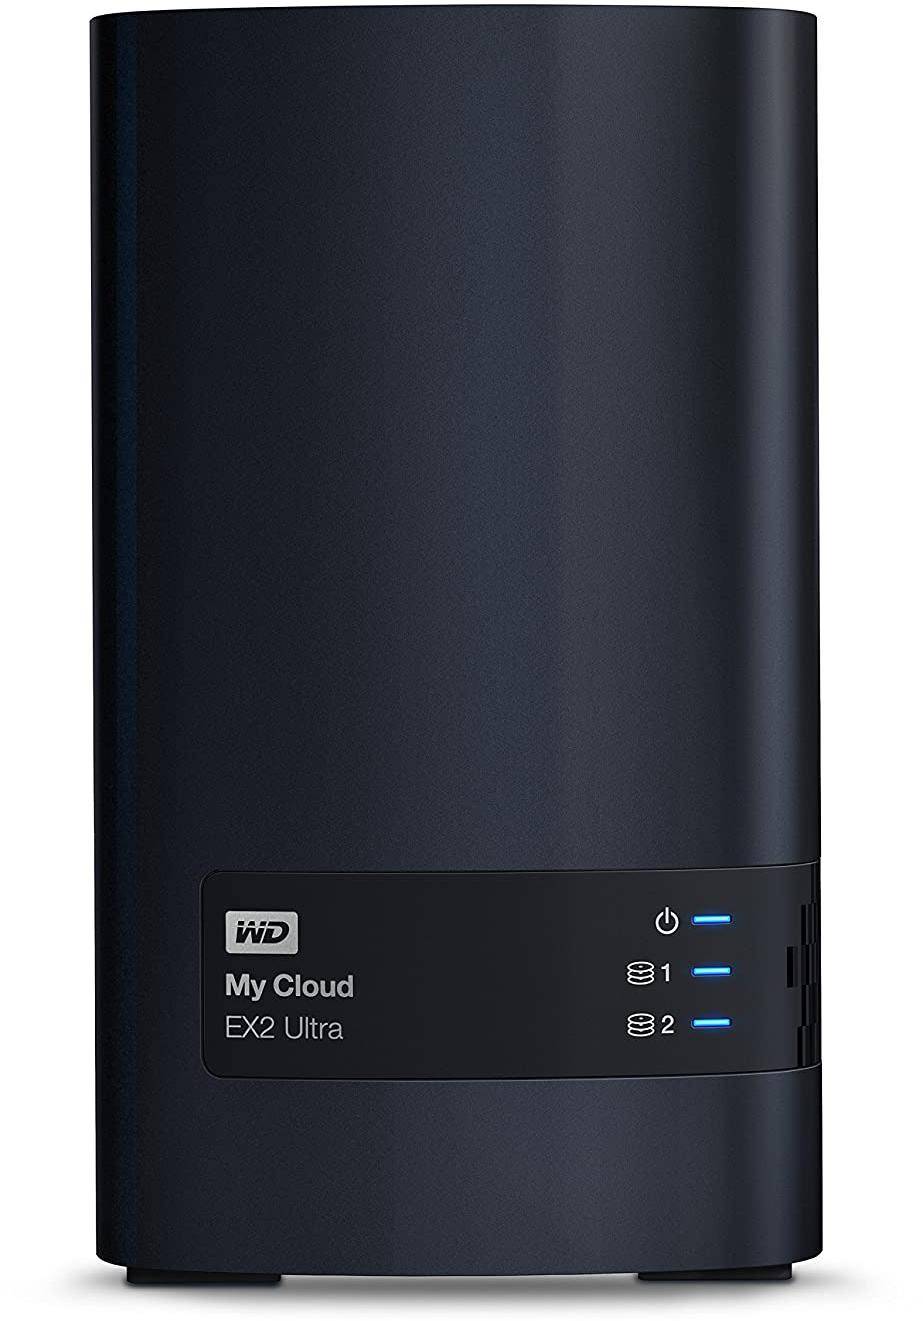 WD Diskless My Cloud EX2 Ultra Network Attached Storage zoom image